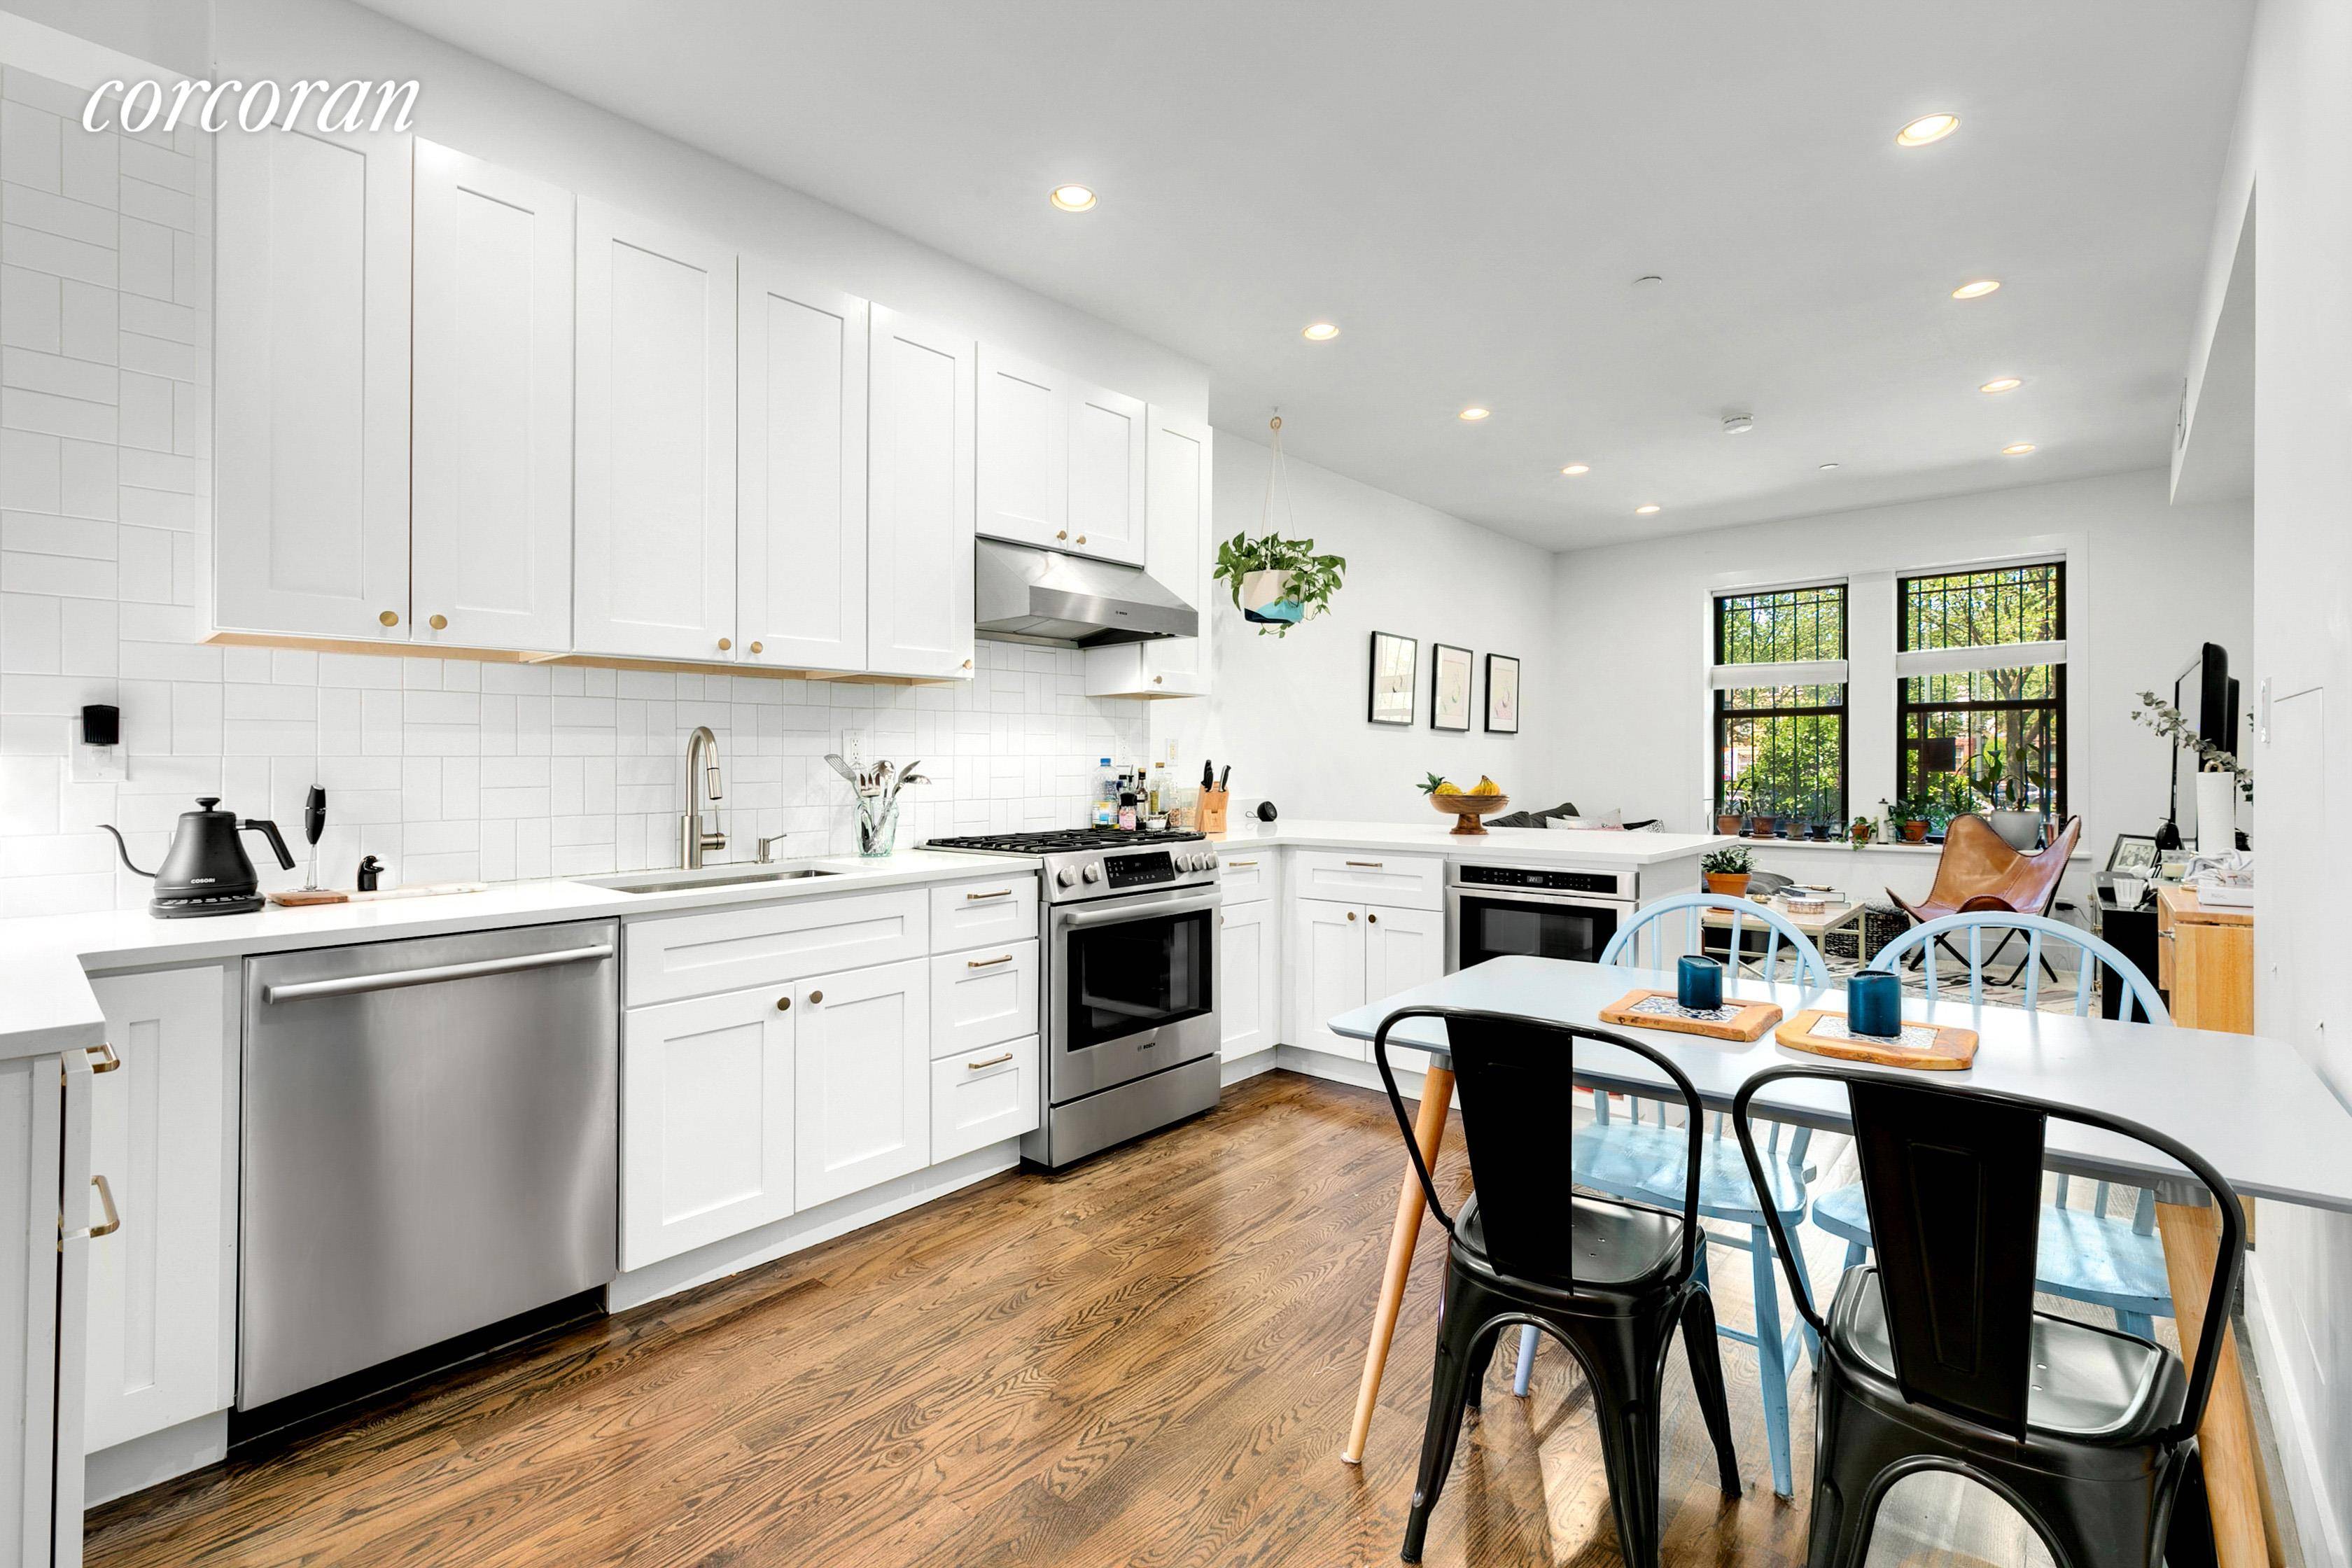 Immense, 1, 500ft2 maisonette home at the crossroads of Crown Heights and Prospect Heights in Brooklyn !